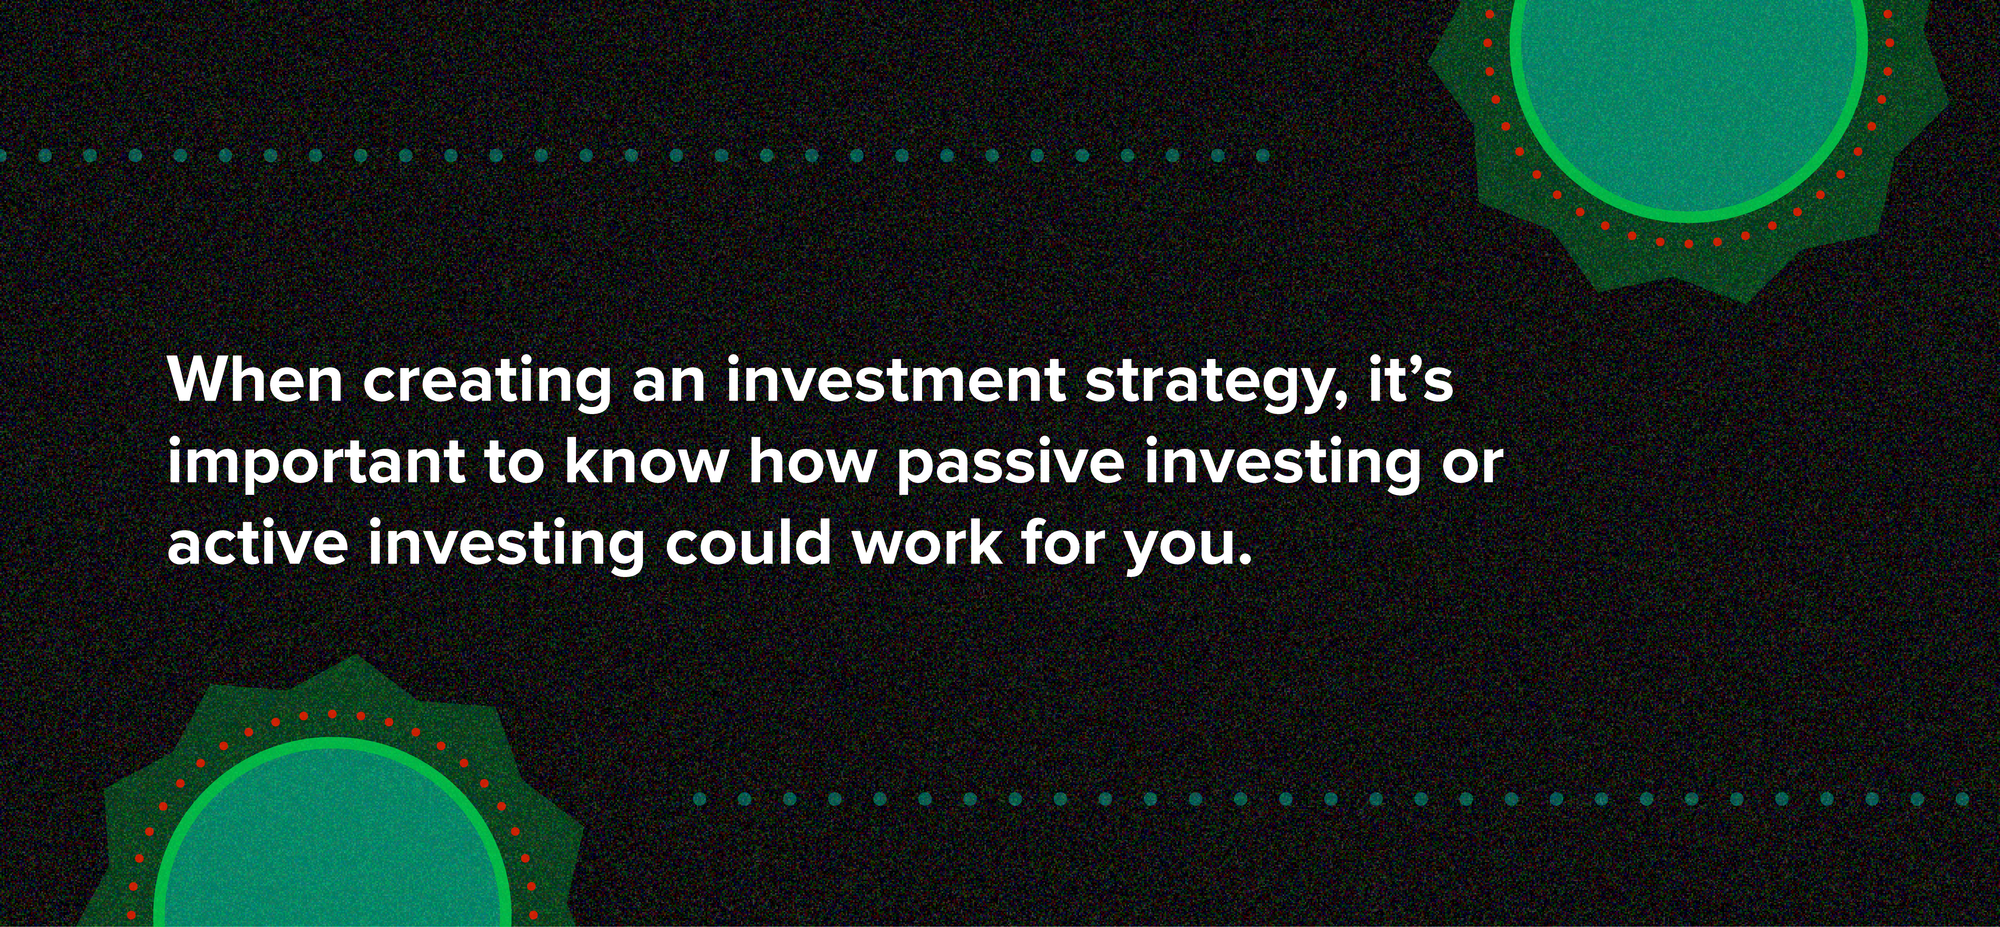 When creating an investment strategy, it’s important to know how passive investing or active investing could work for you.